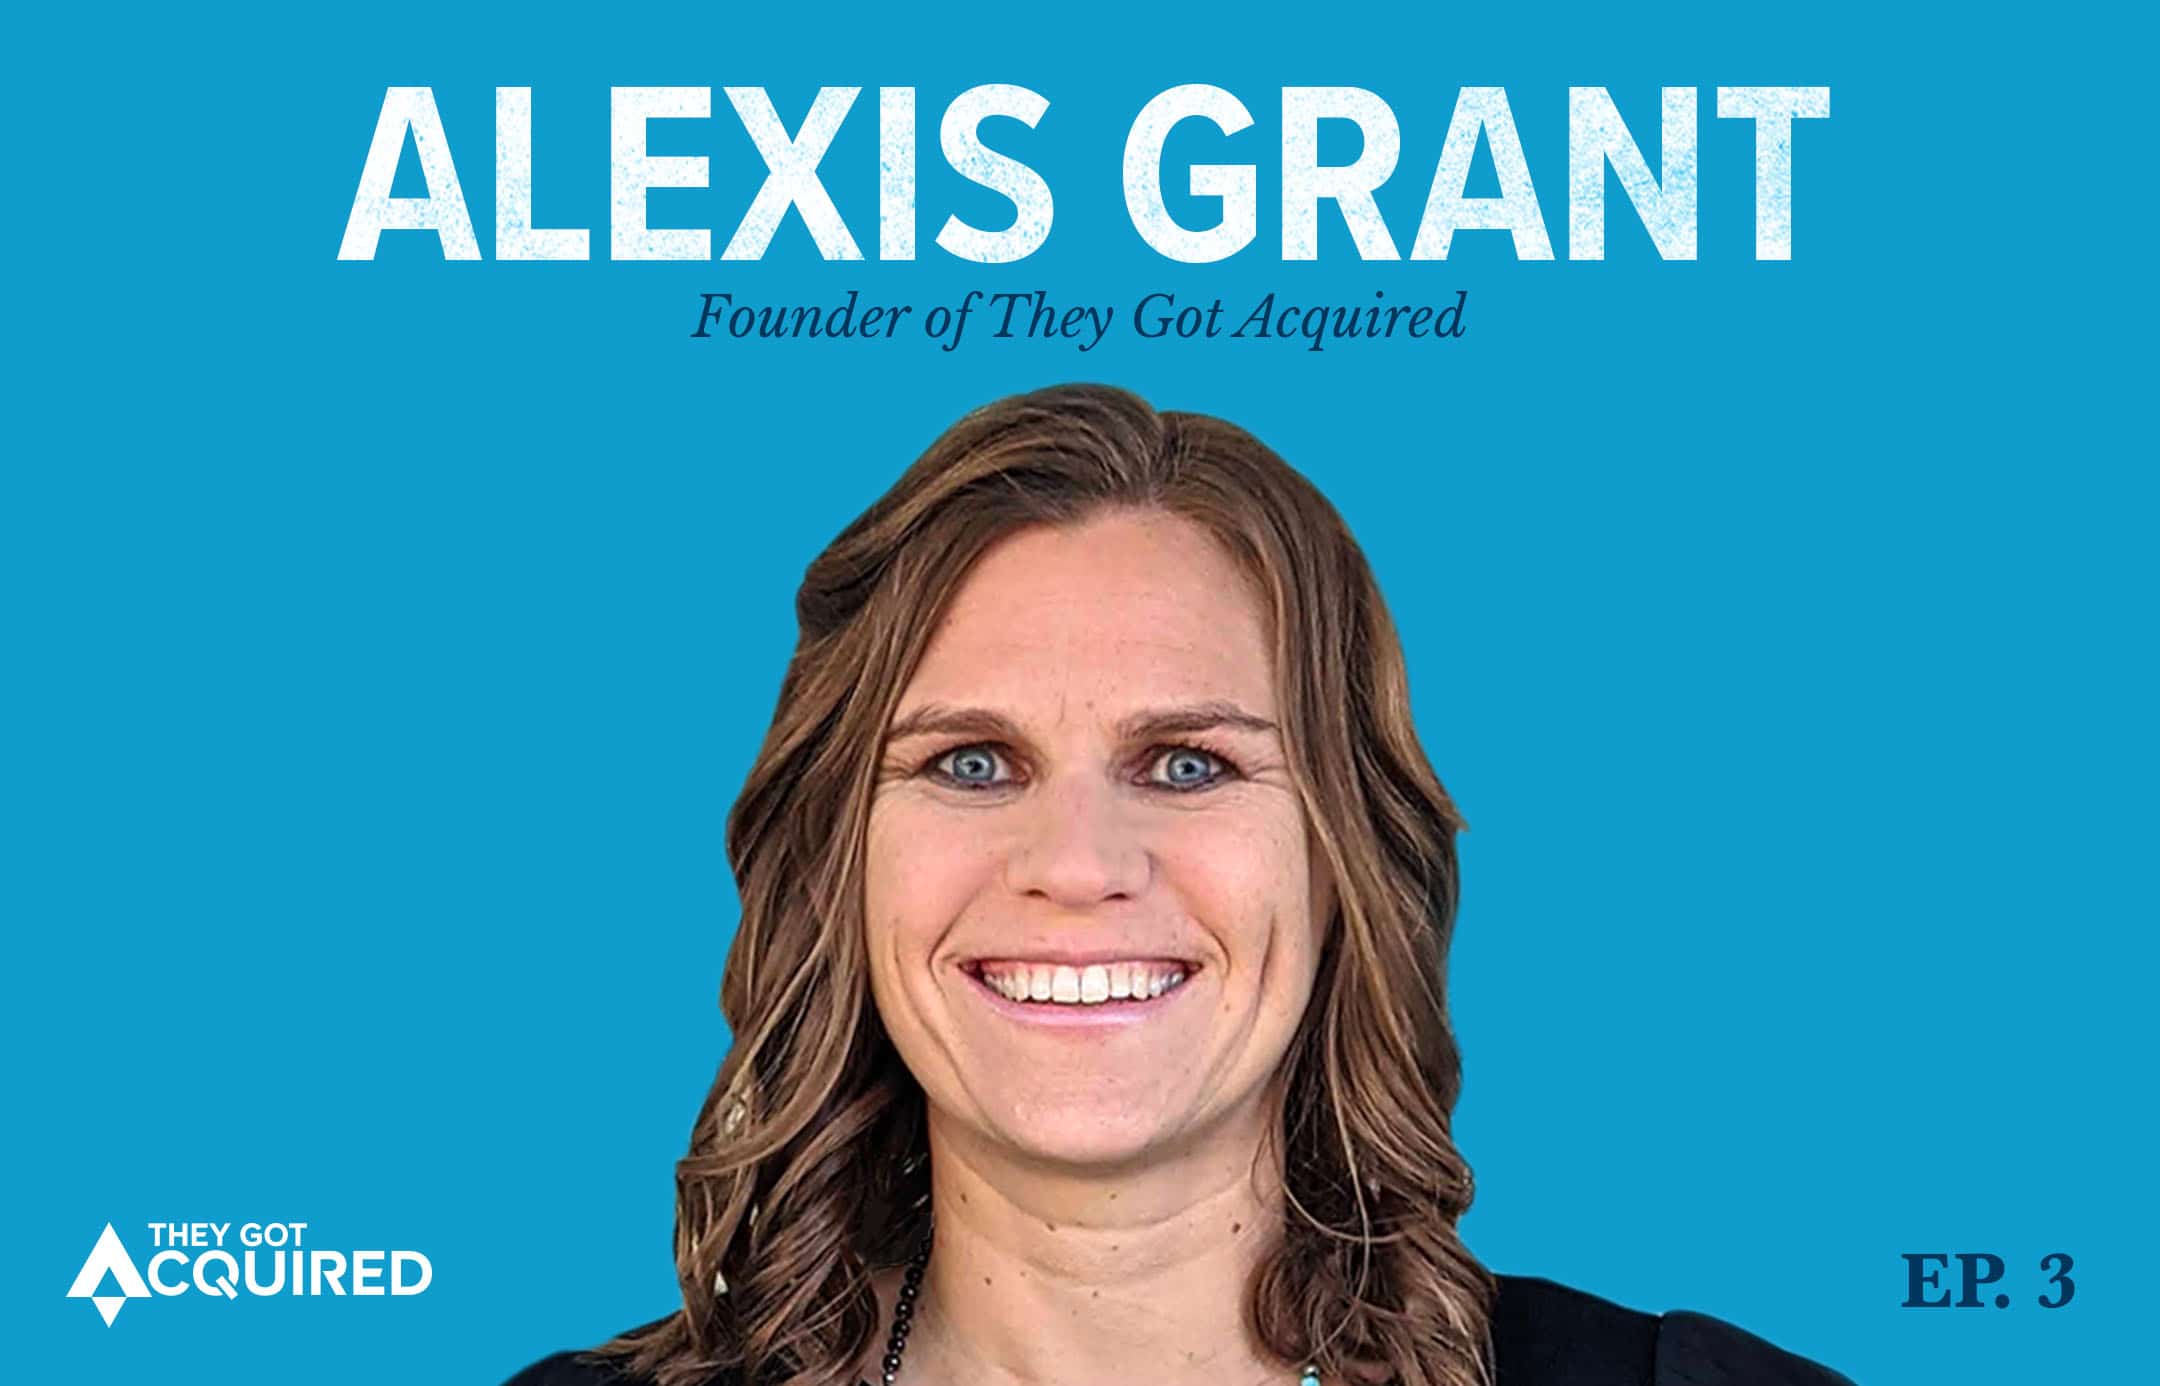 Alexis Grant, Founder of They Got Acquired